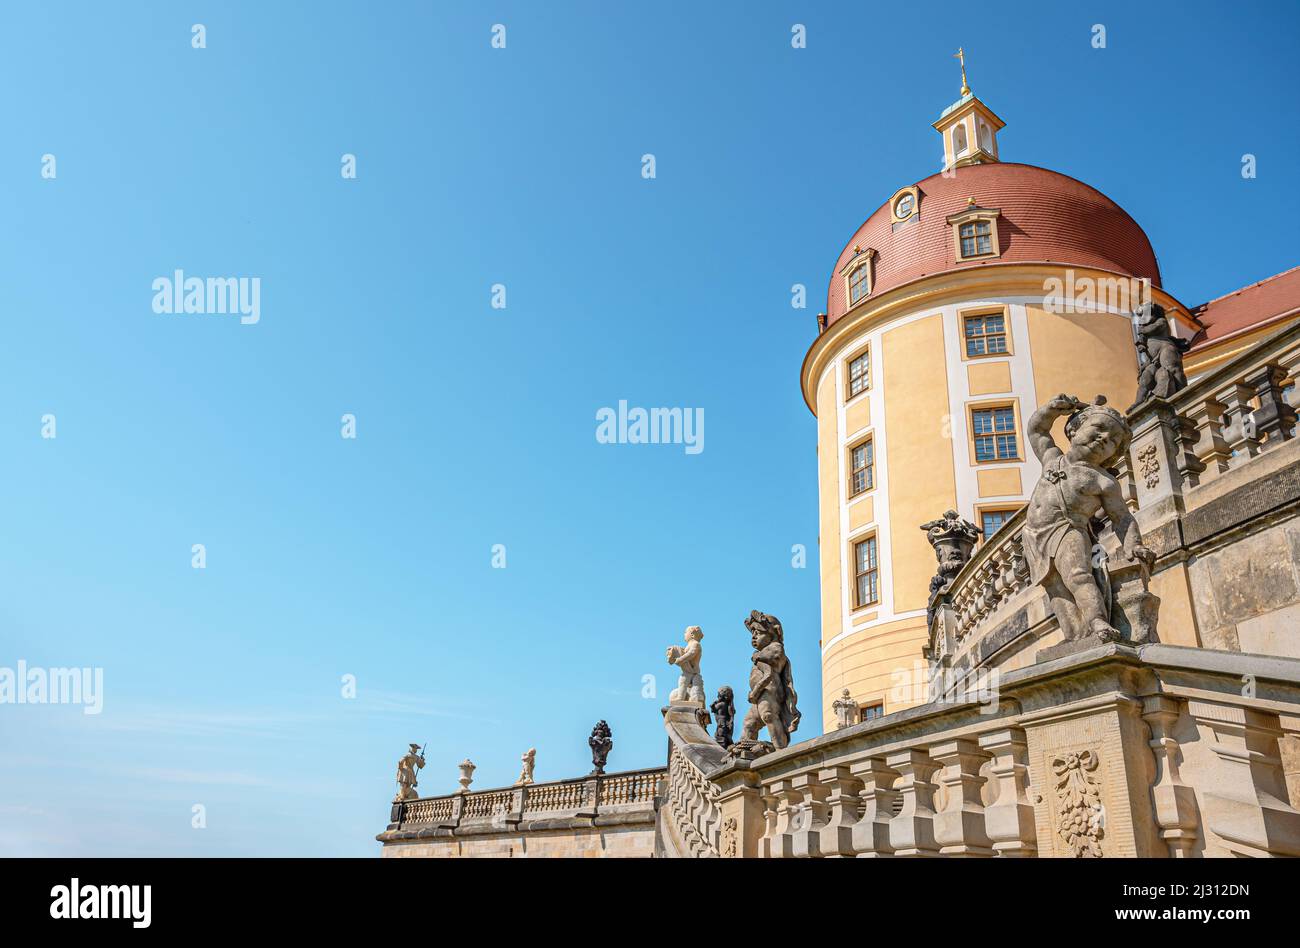 Sculptures in front of Moritzburg Castle, Saxony, Germany Stock Photo